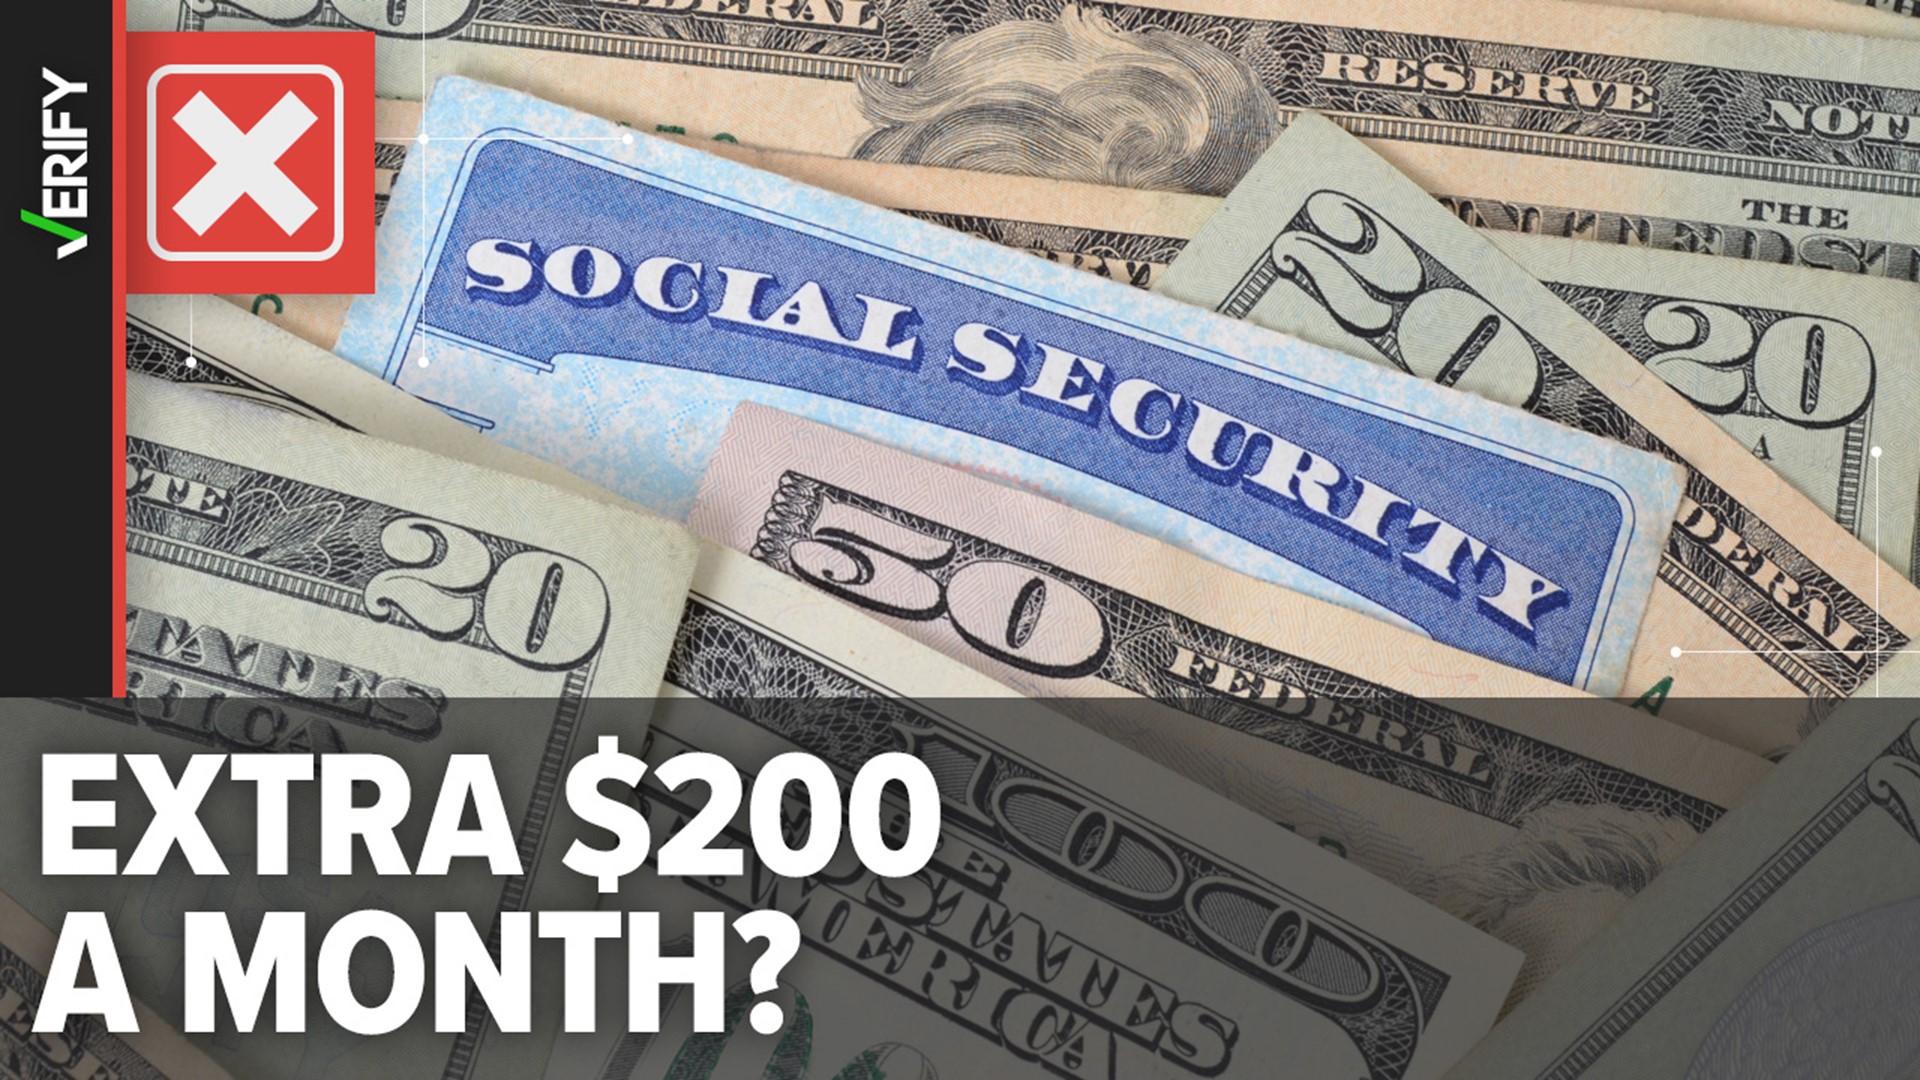 The Social Security Expansion Act included a $200 monthly increase to benefits. But it didn’t pass in 2022 and hasn’t been reintroduced in the House or Senate.